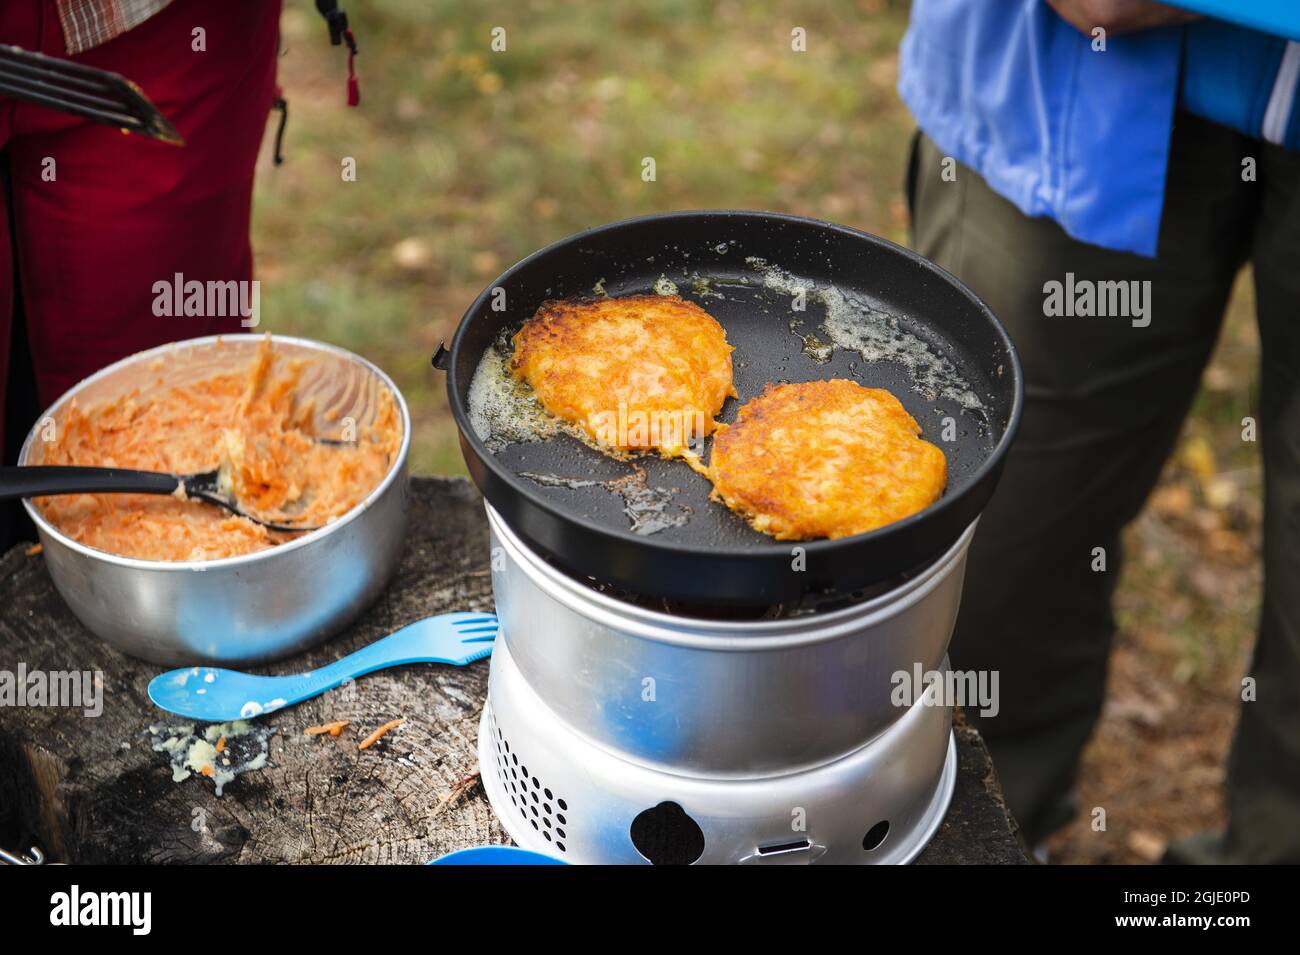 Cooking food outdoors on a Trangia camping stove Photo Anna Hallams / TT /  code 76143 Stock Photo - Alamy